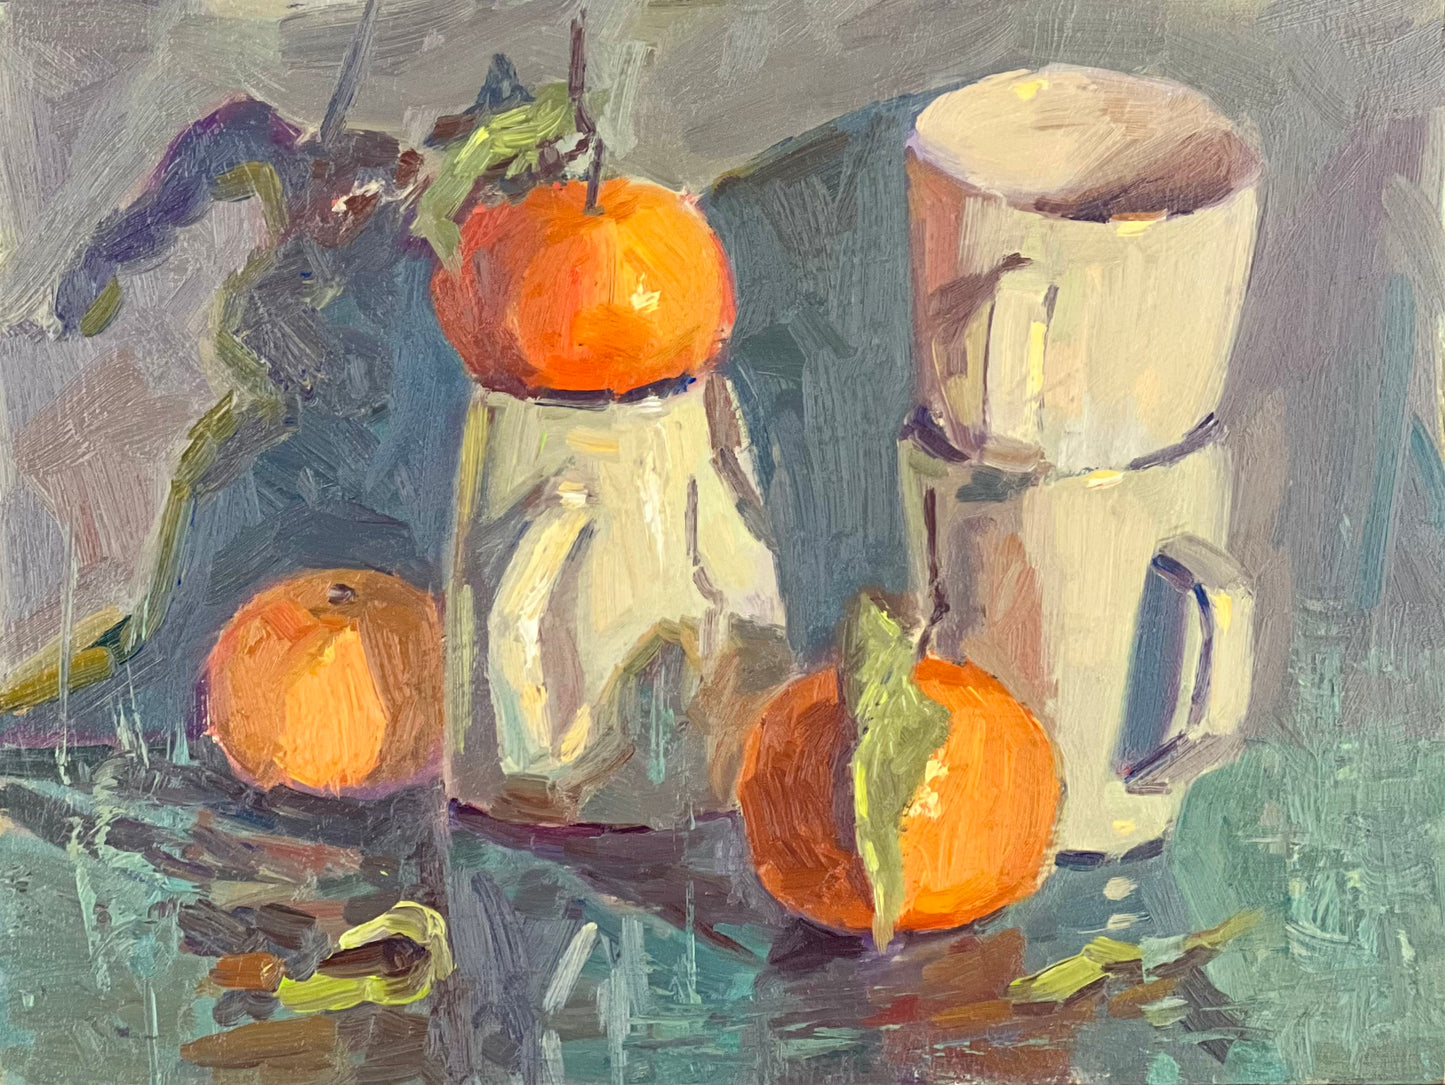 Oranges and Cups 3 - Still Life Oil Painting